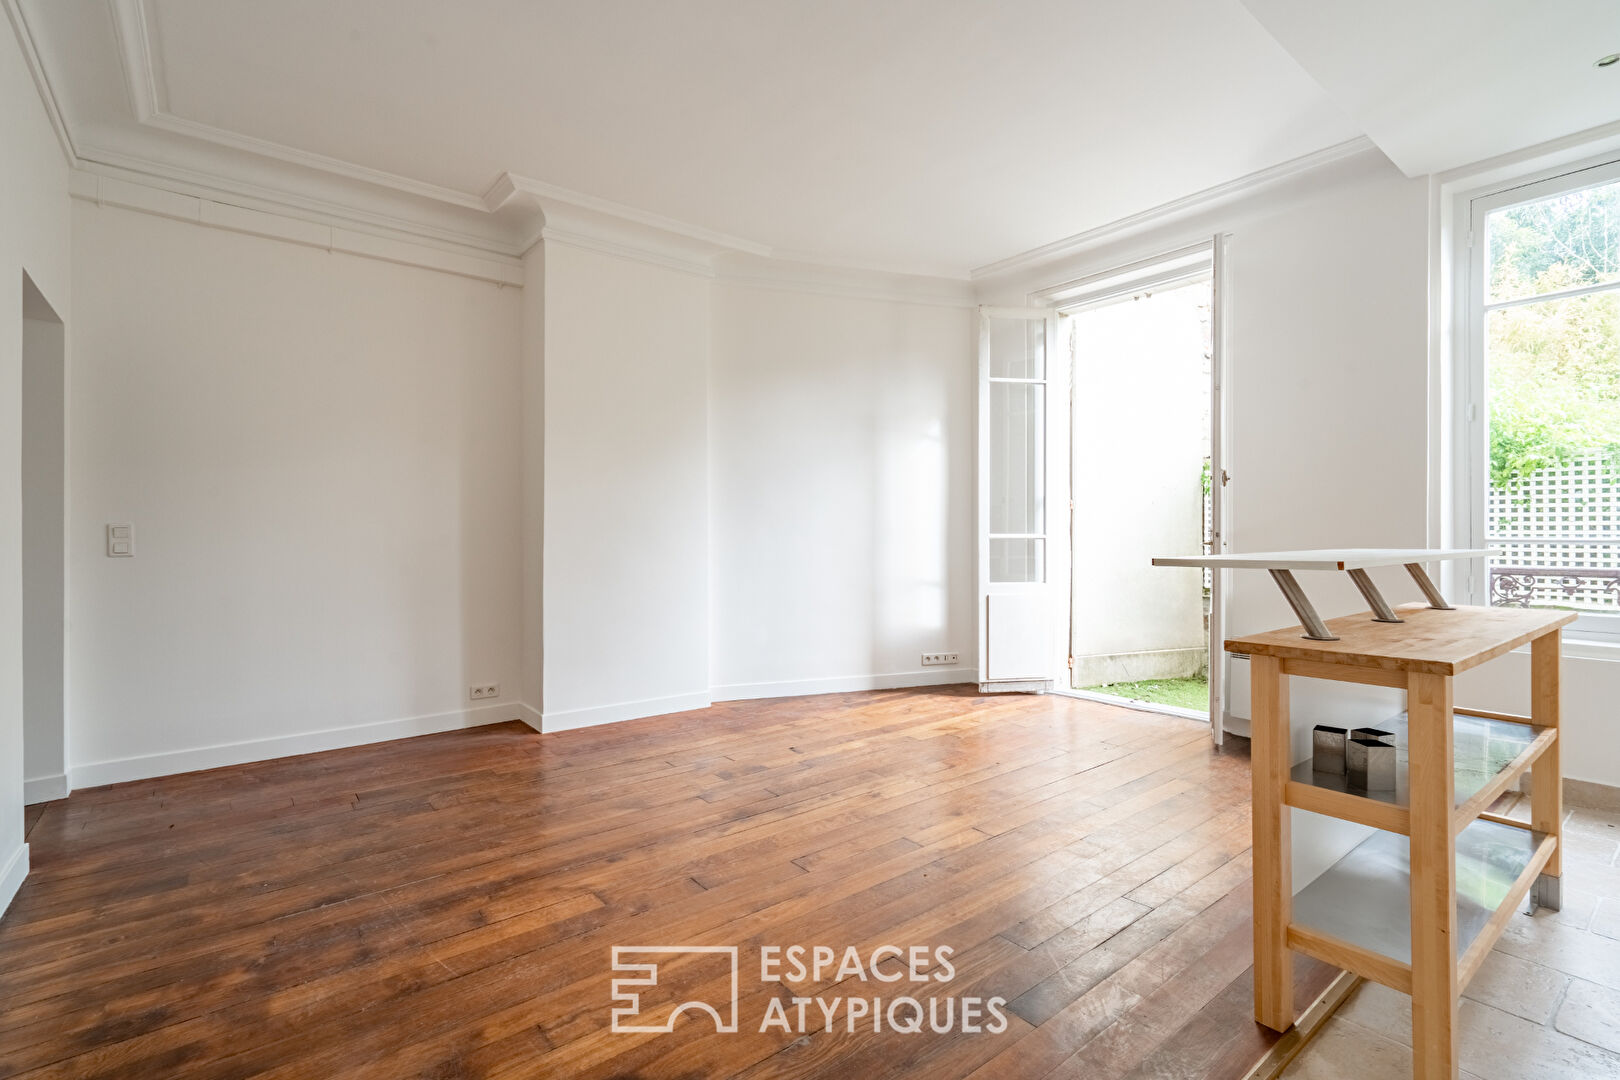 Apartment with terrace and garden in the center of Saint Germain